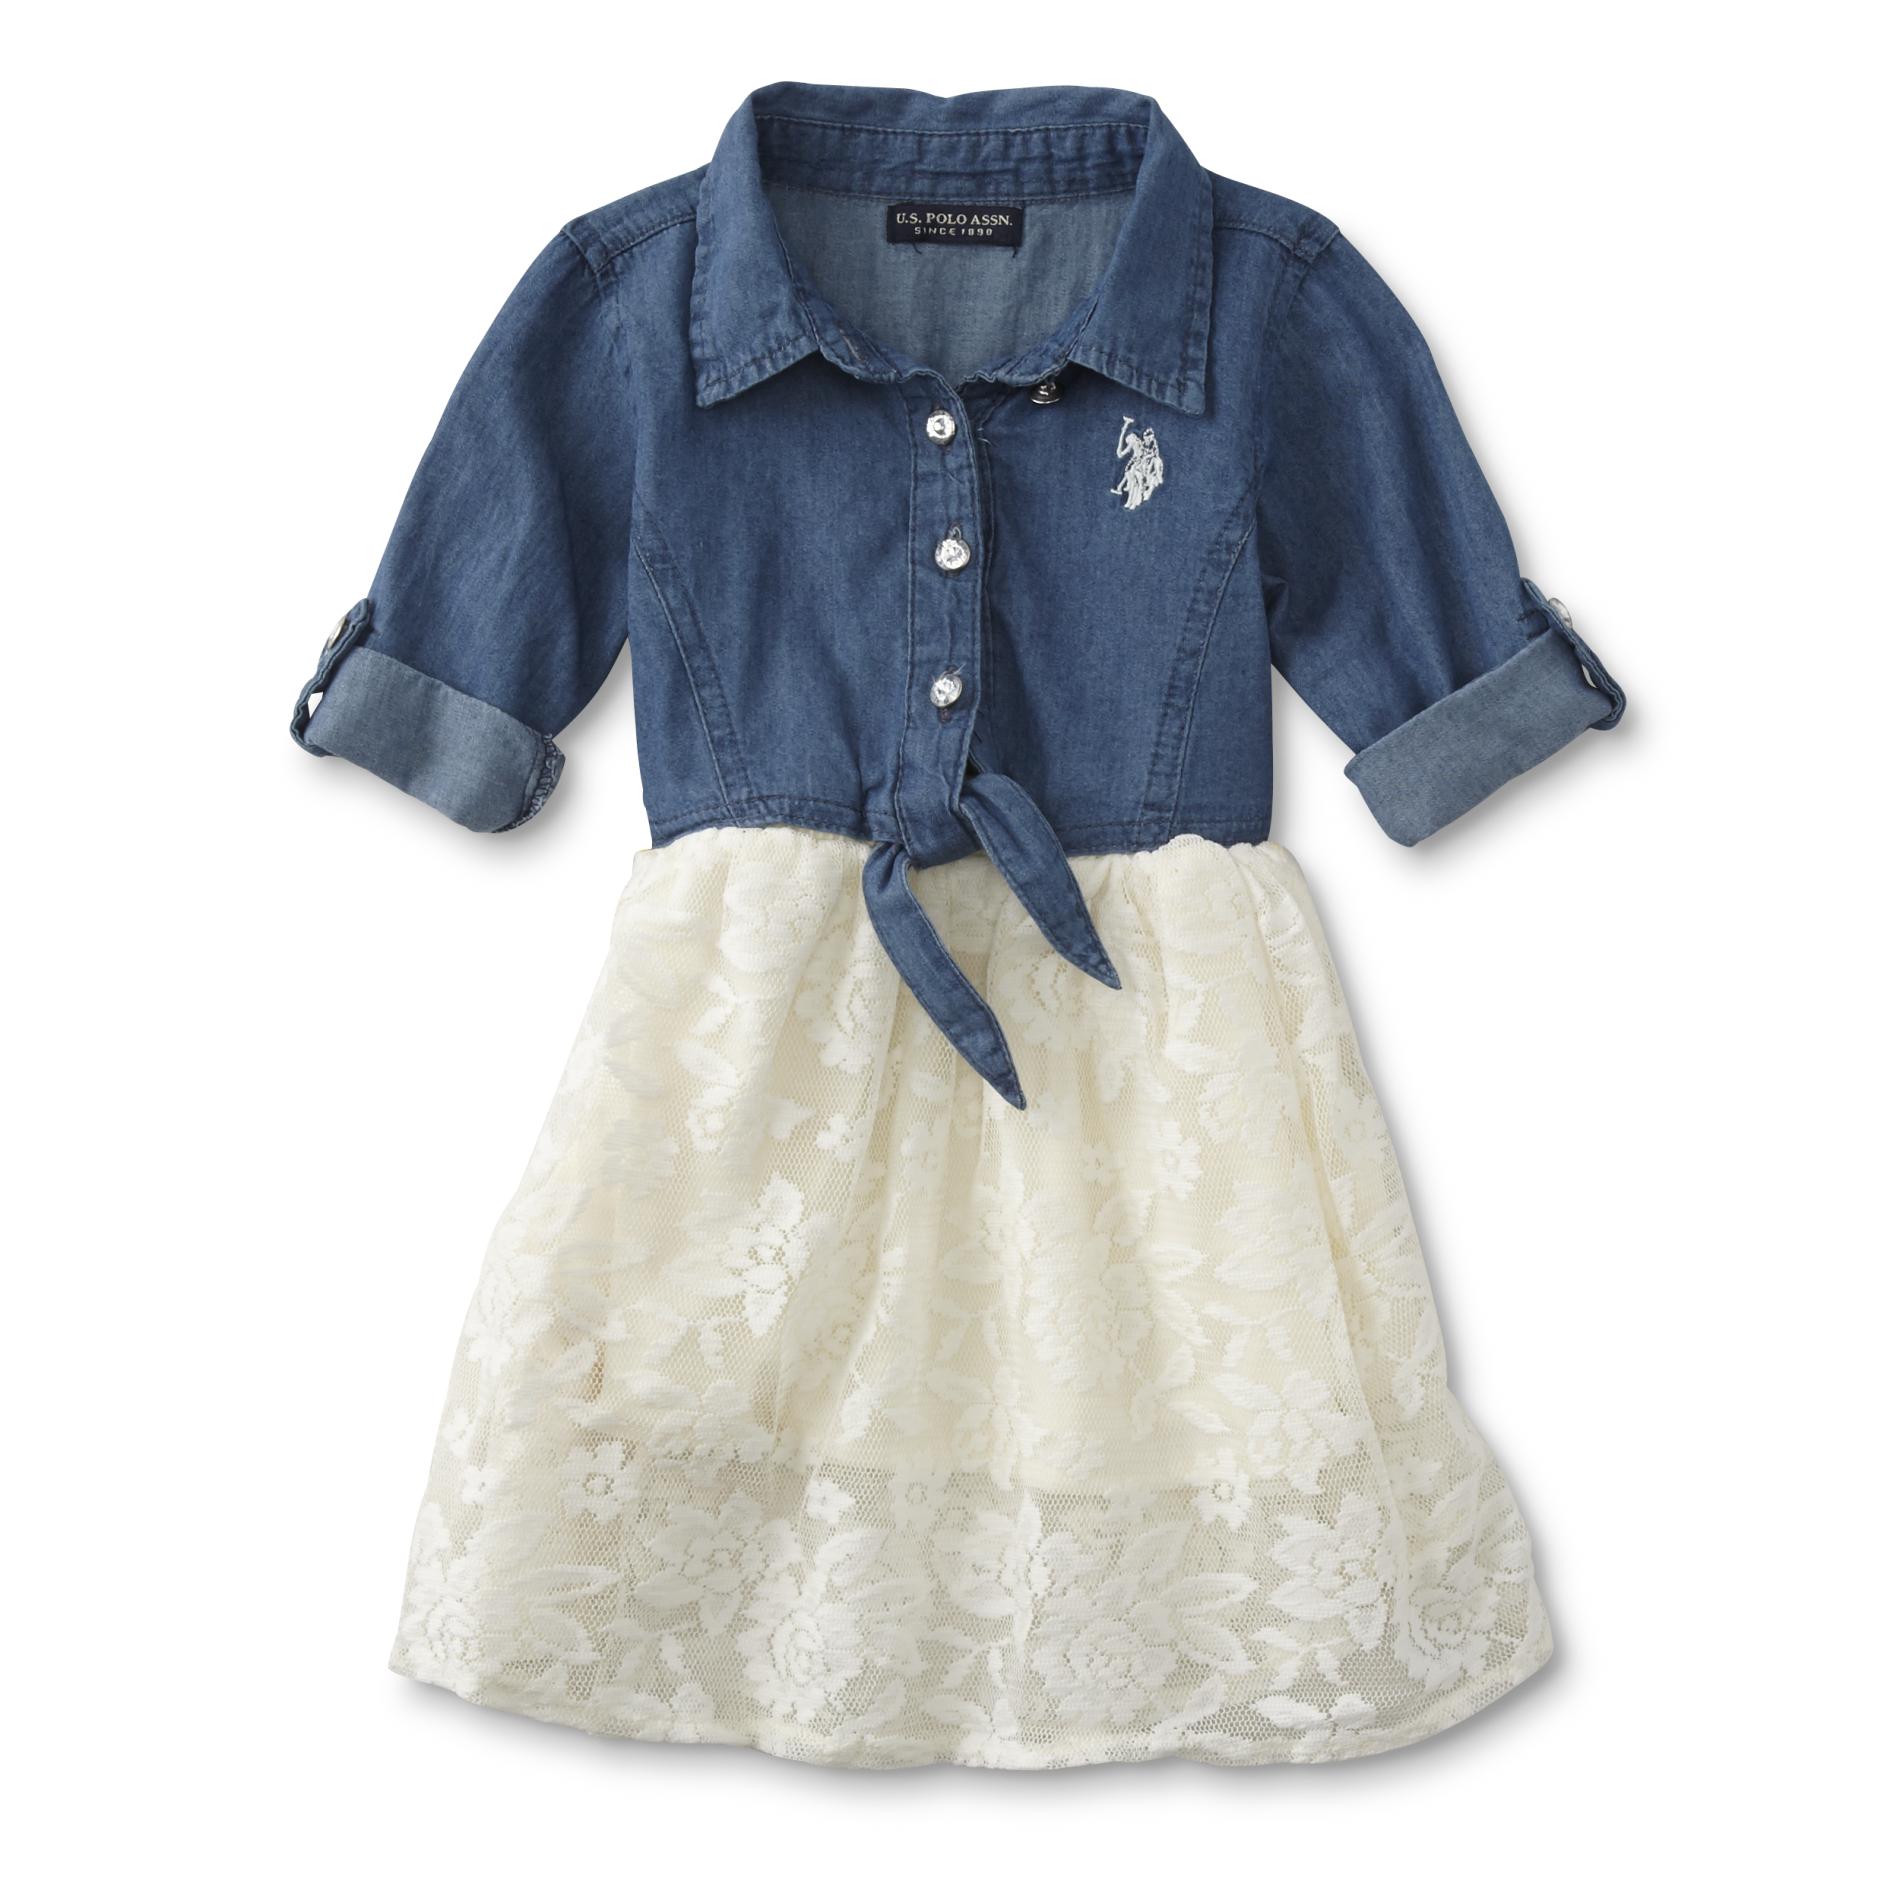 U.S. Polo Assn. Infant & Toddler Girls' Knotted Dress